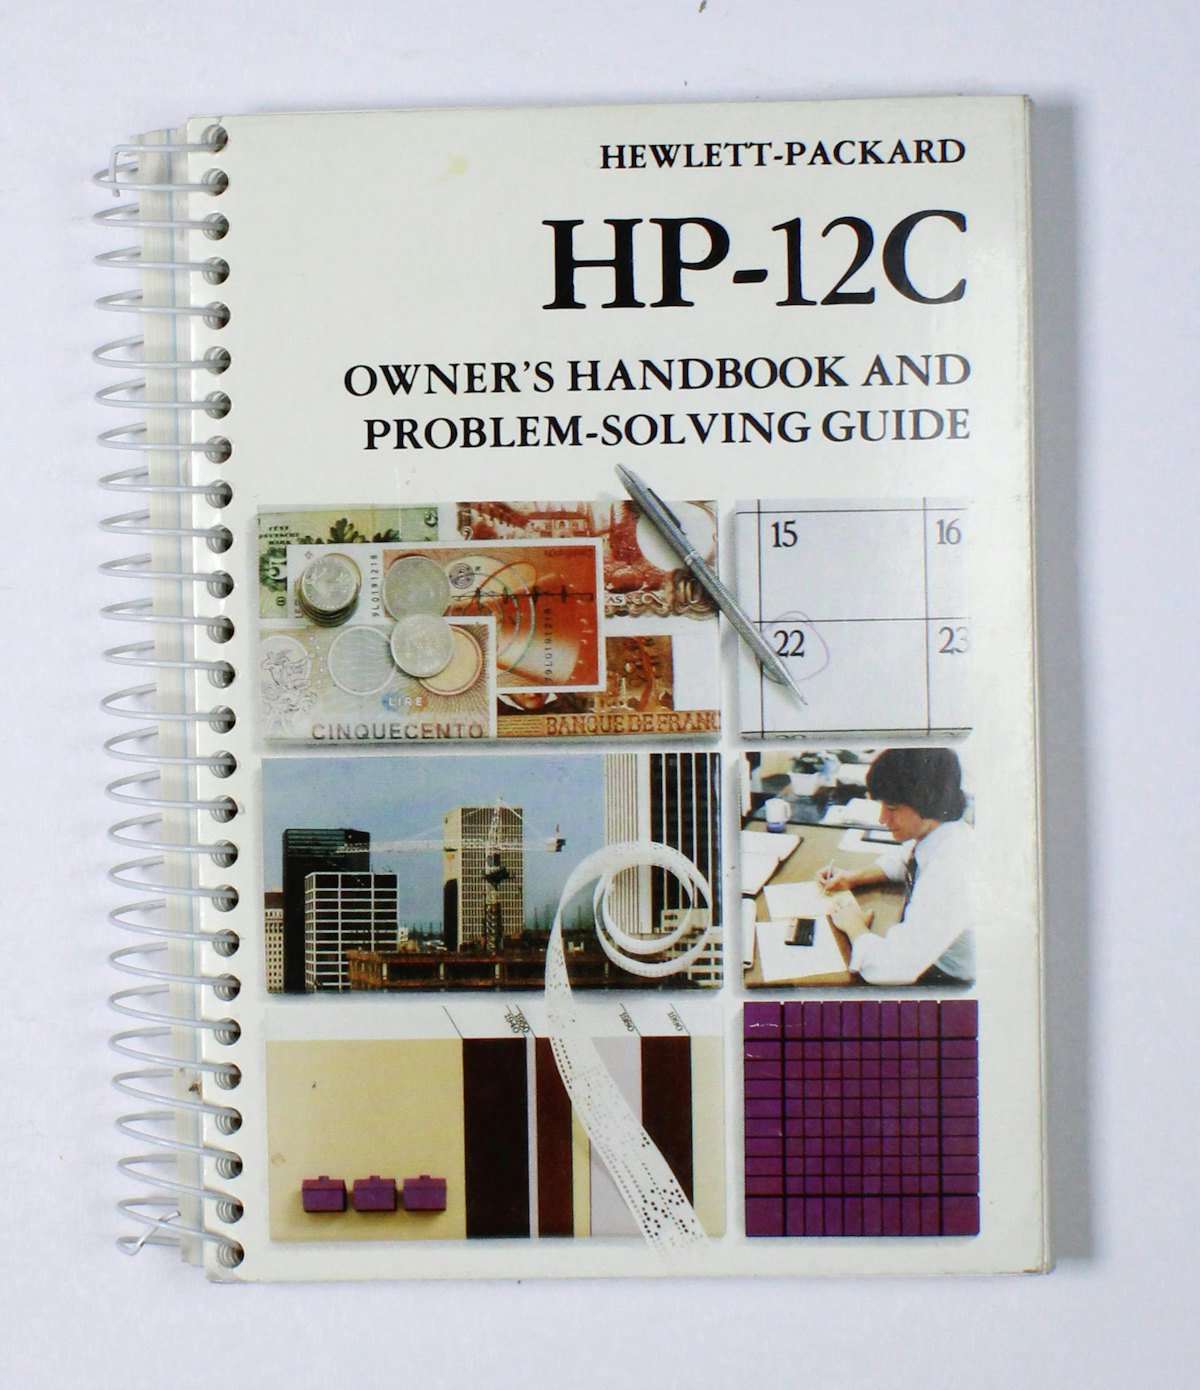 HP-12C Owner's Handbook and Problem Solving Guide